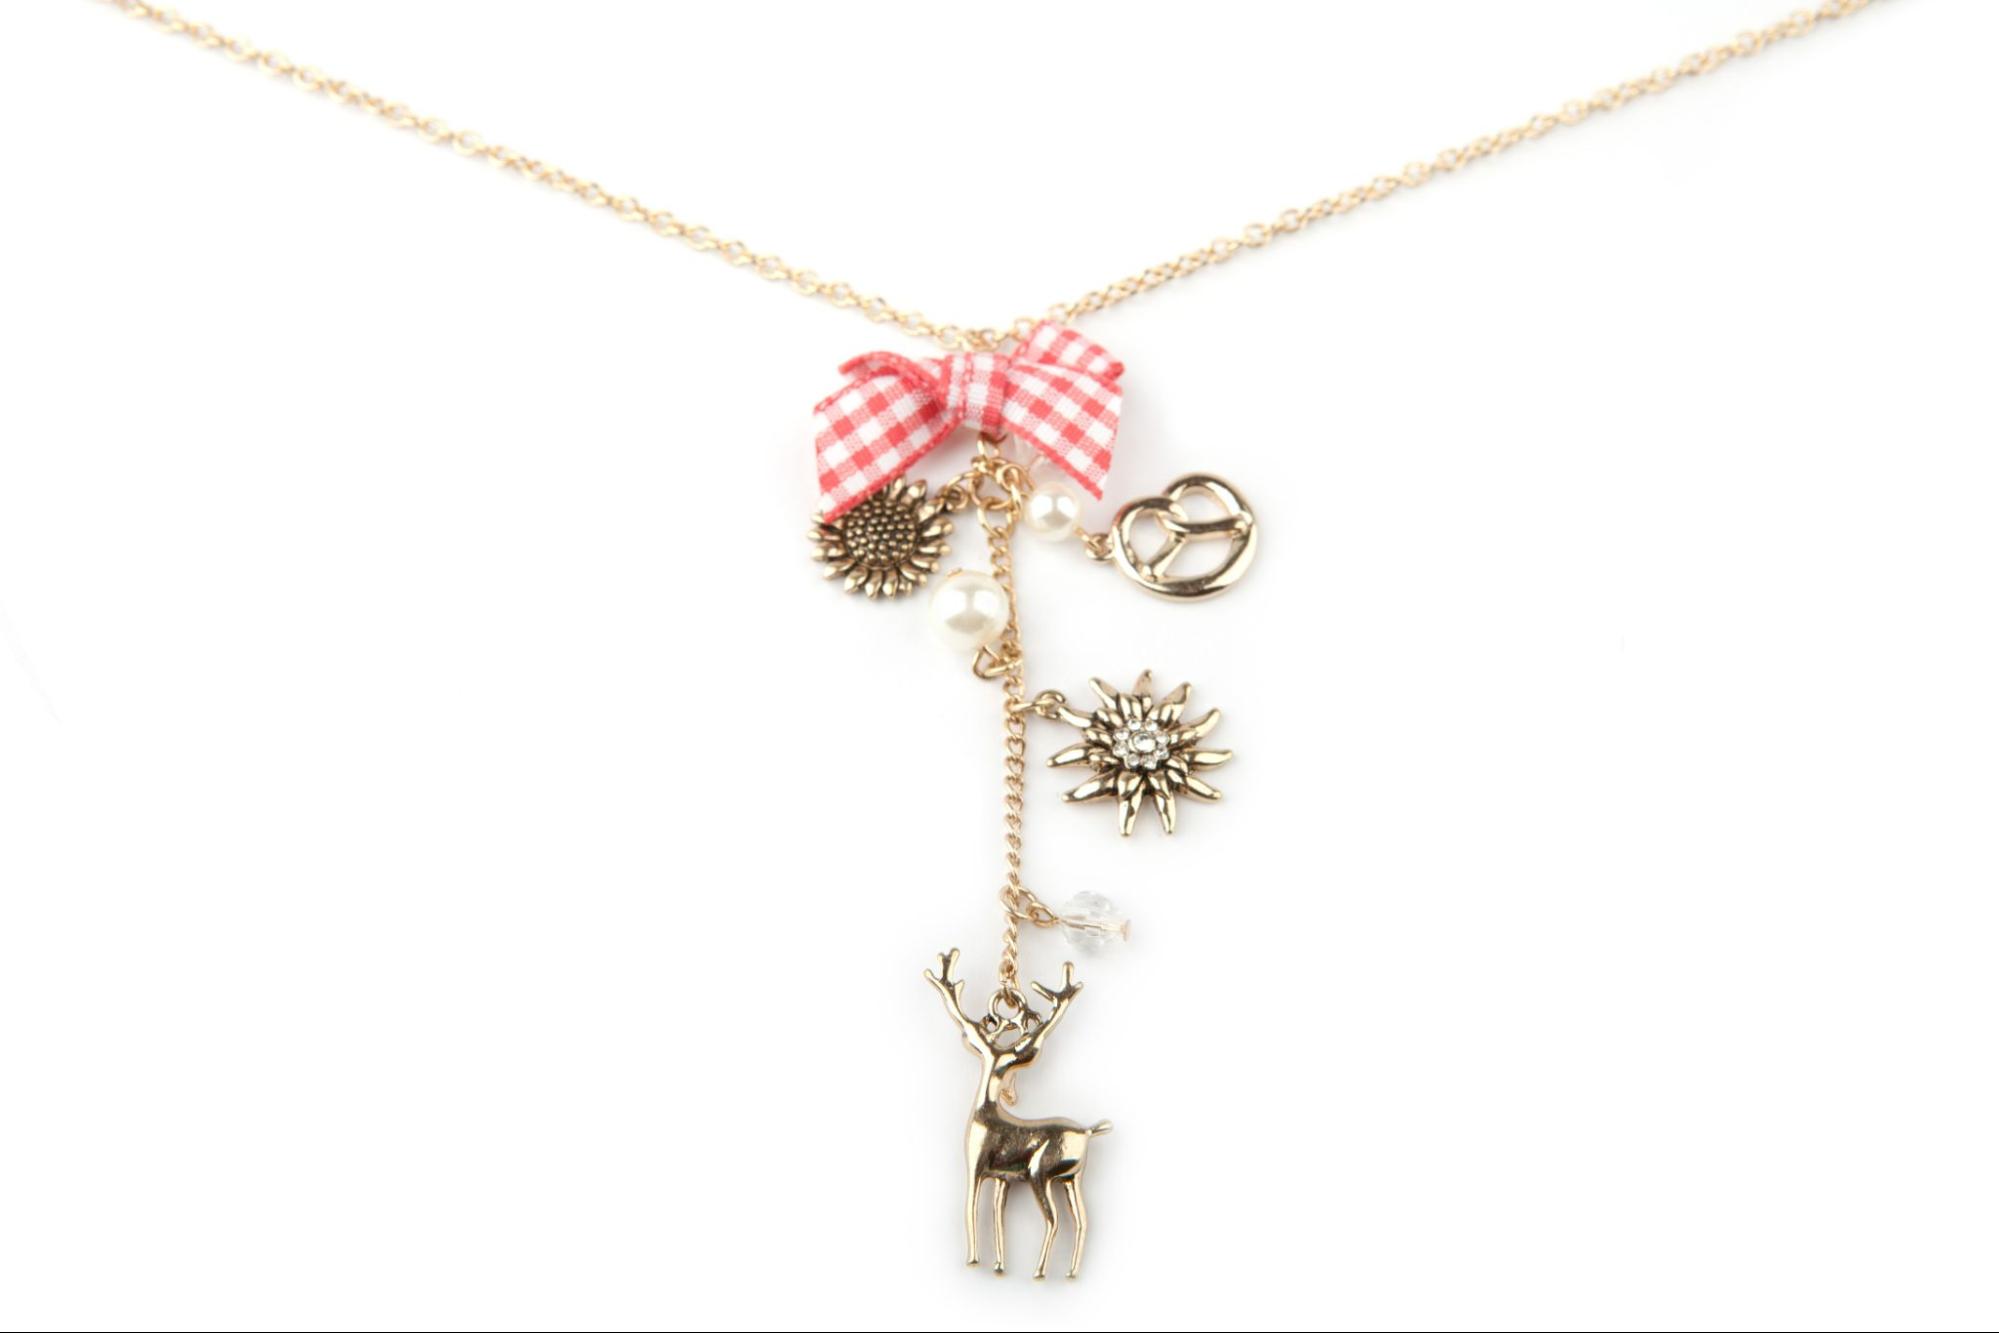 A yellow gold charm necklace with sunflower, pretzel, sun and reindeer charms